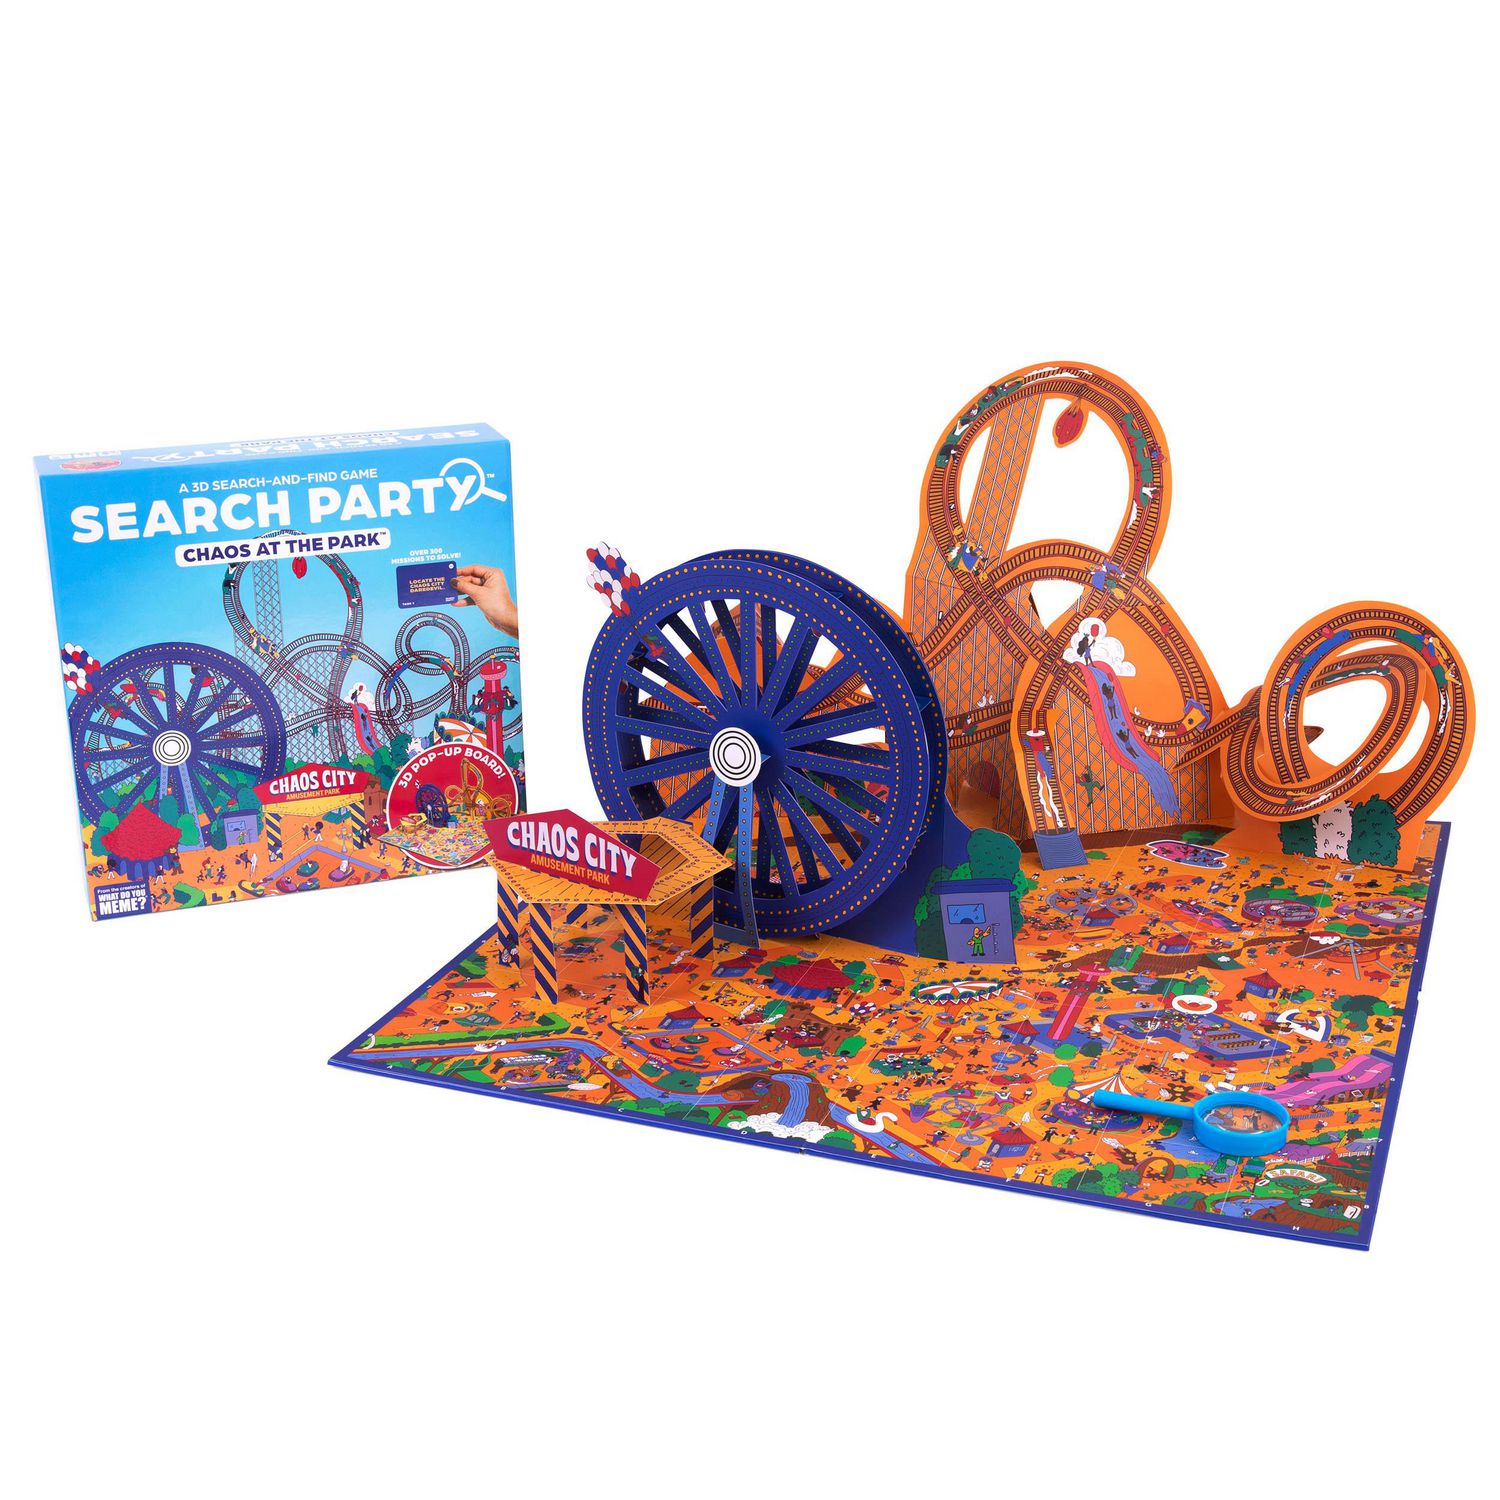 Search Party: Chaos at the Park — A Hands-On Mystery Search and